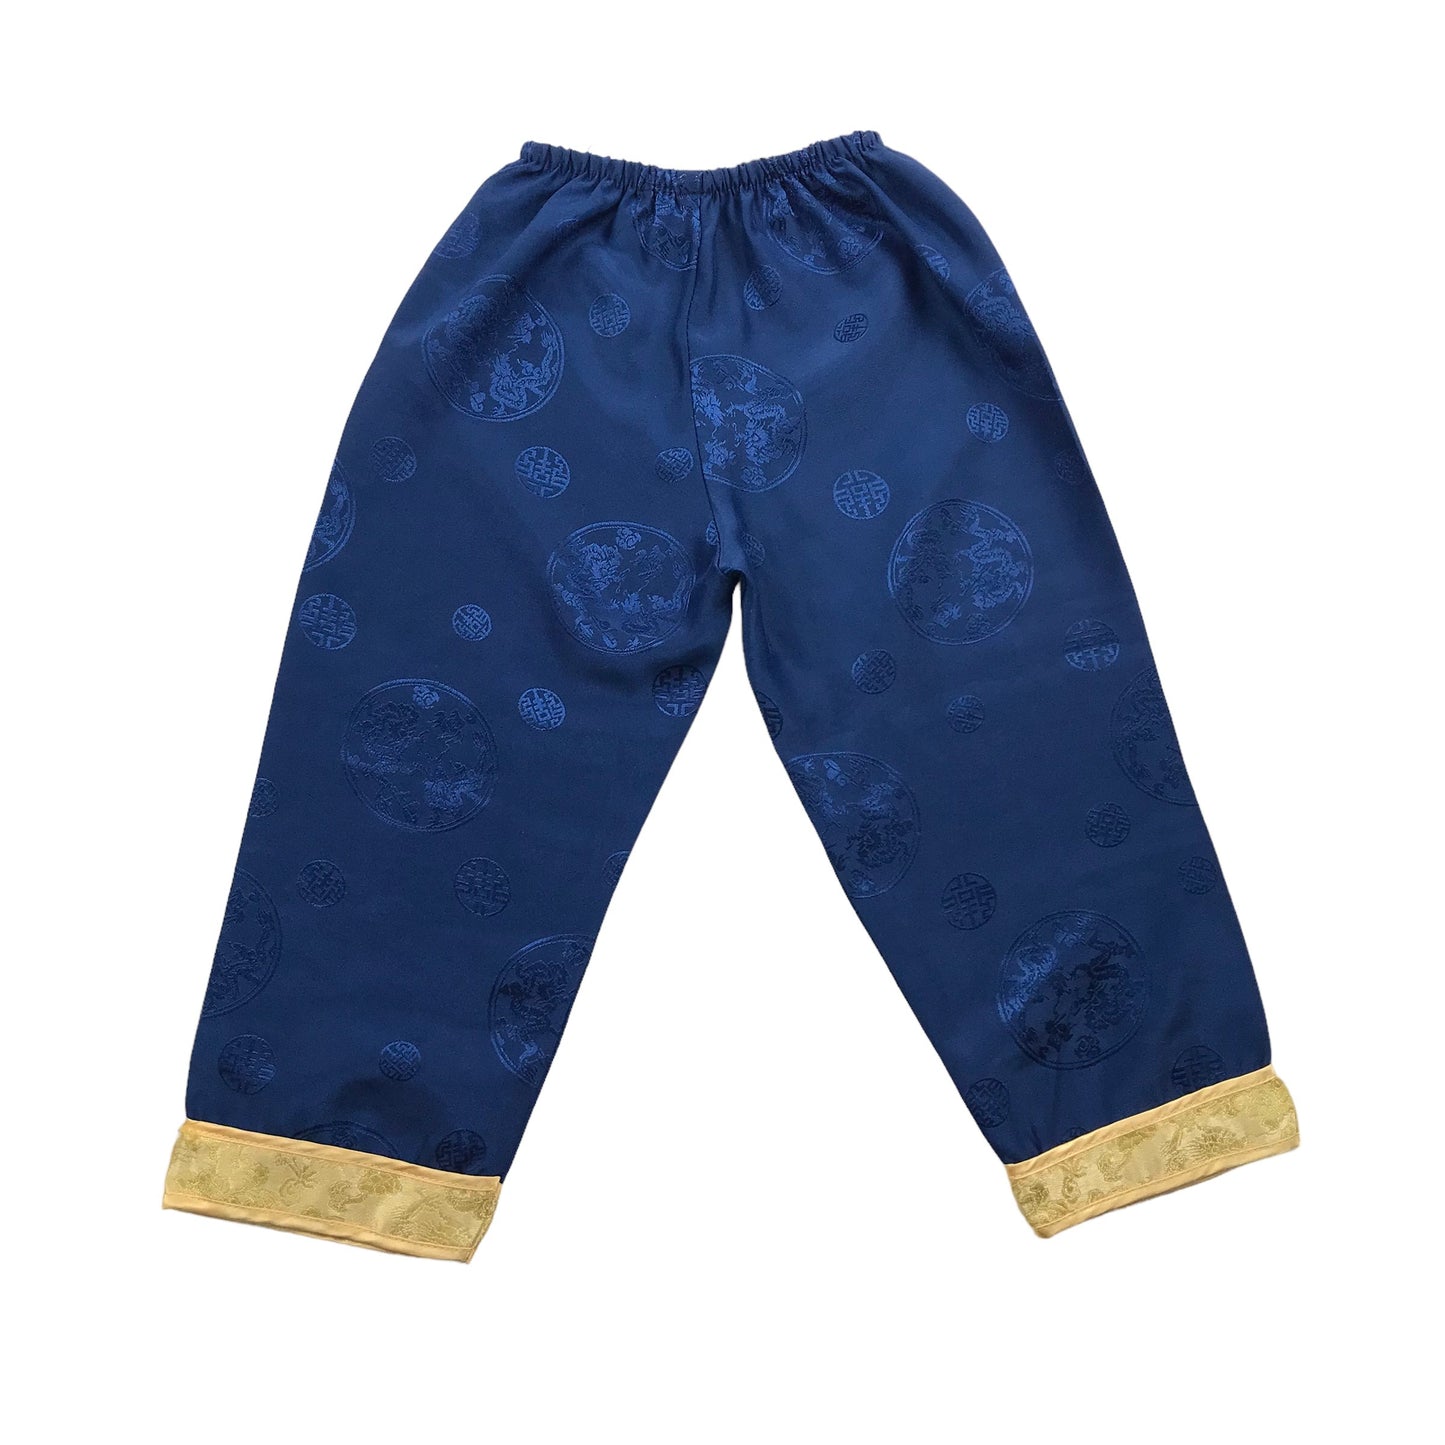 Blue and Golden Silk-like Blouse and Trousers Age 4